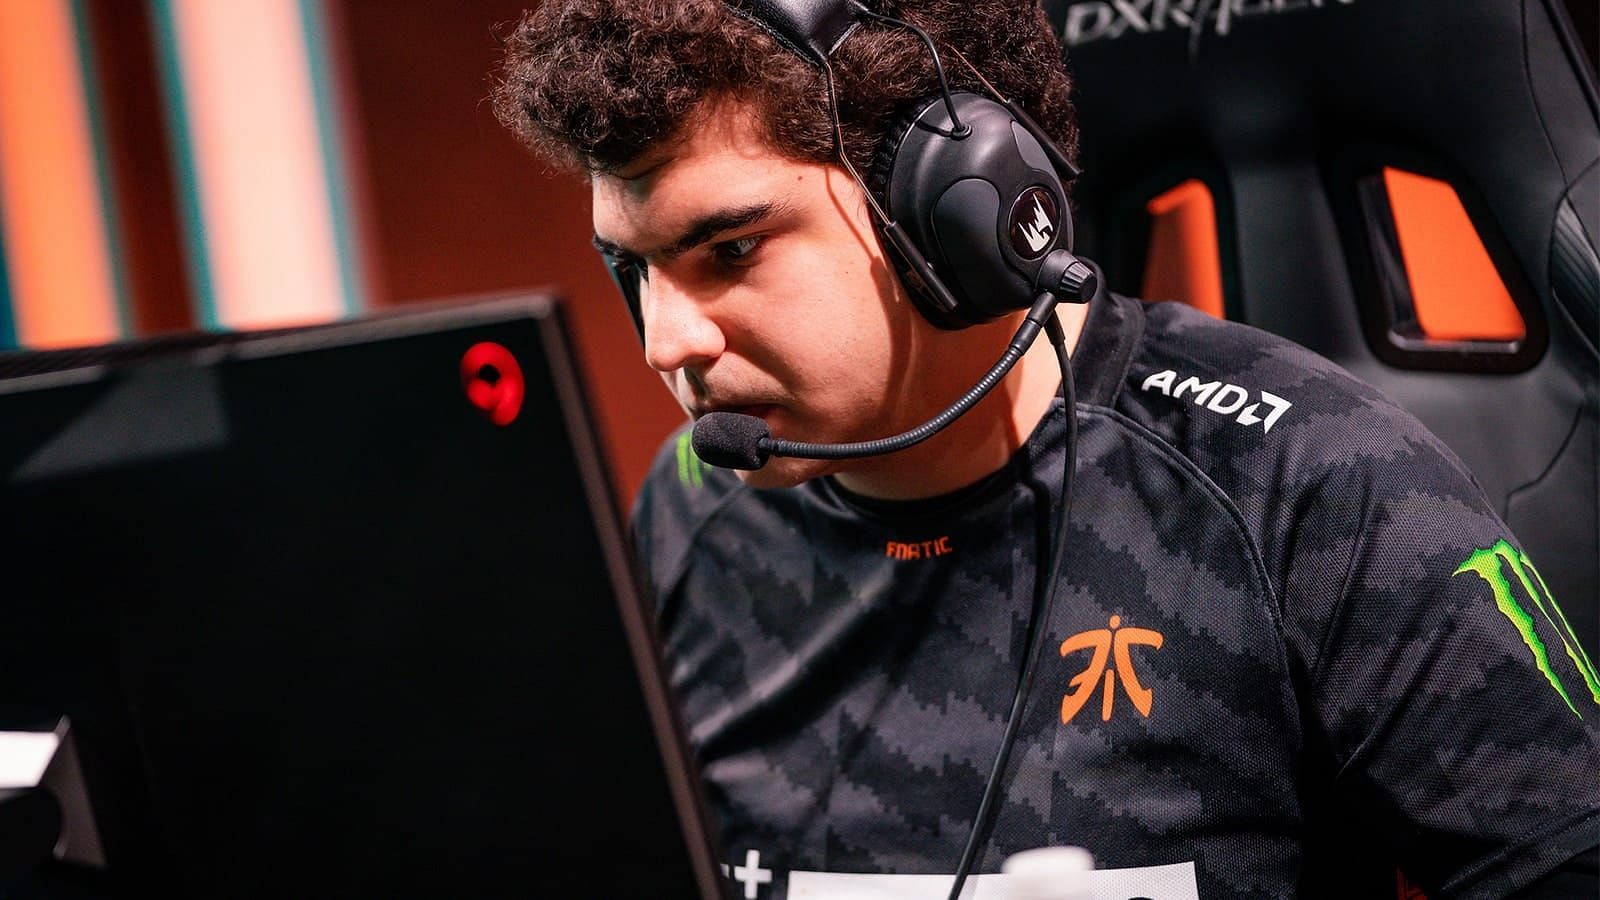 Bwipo is set to leave Fnatic with probable move to North America (Image via League of Legends)